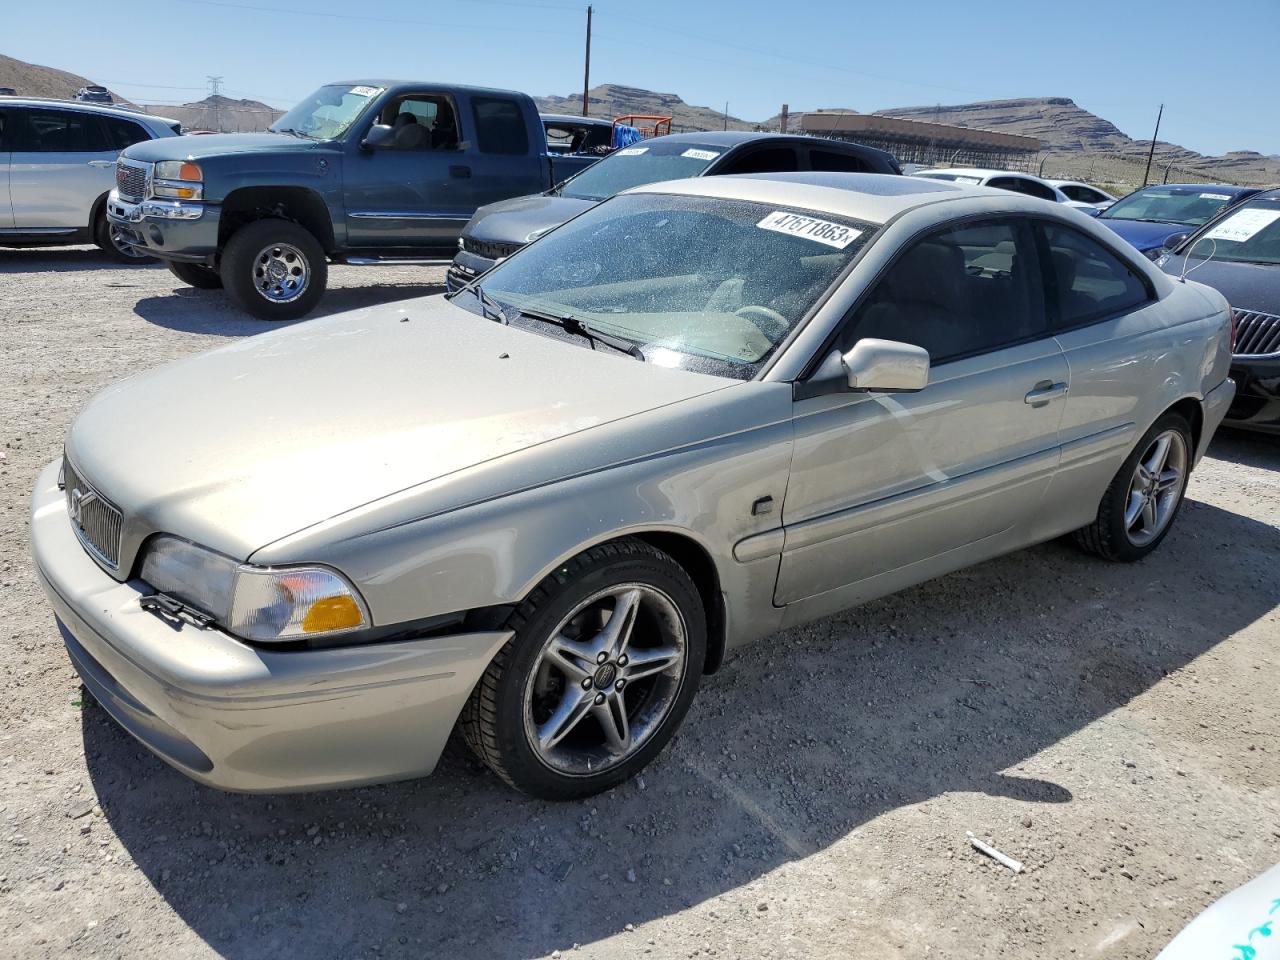 2001 Volvo C70 Turbo for sale at Copart Las Vegas, NV Lot #47671*** |  SalvageReseller.com